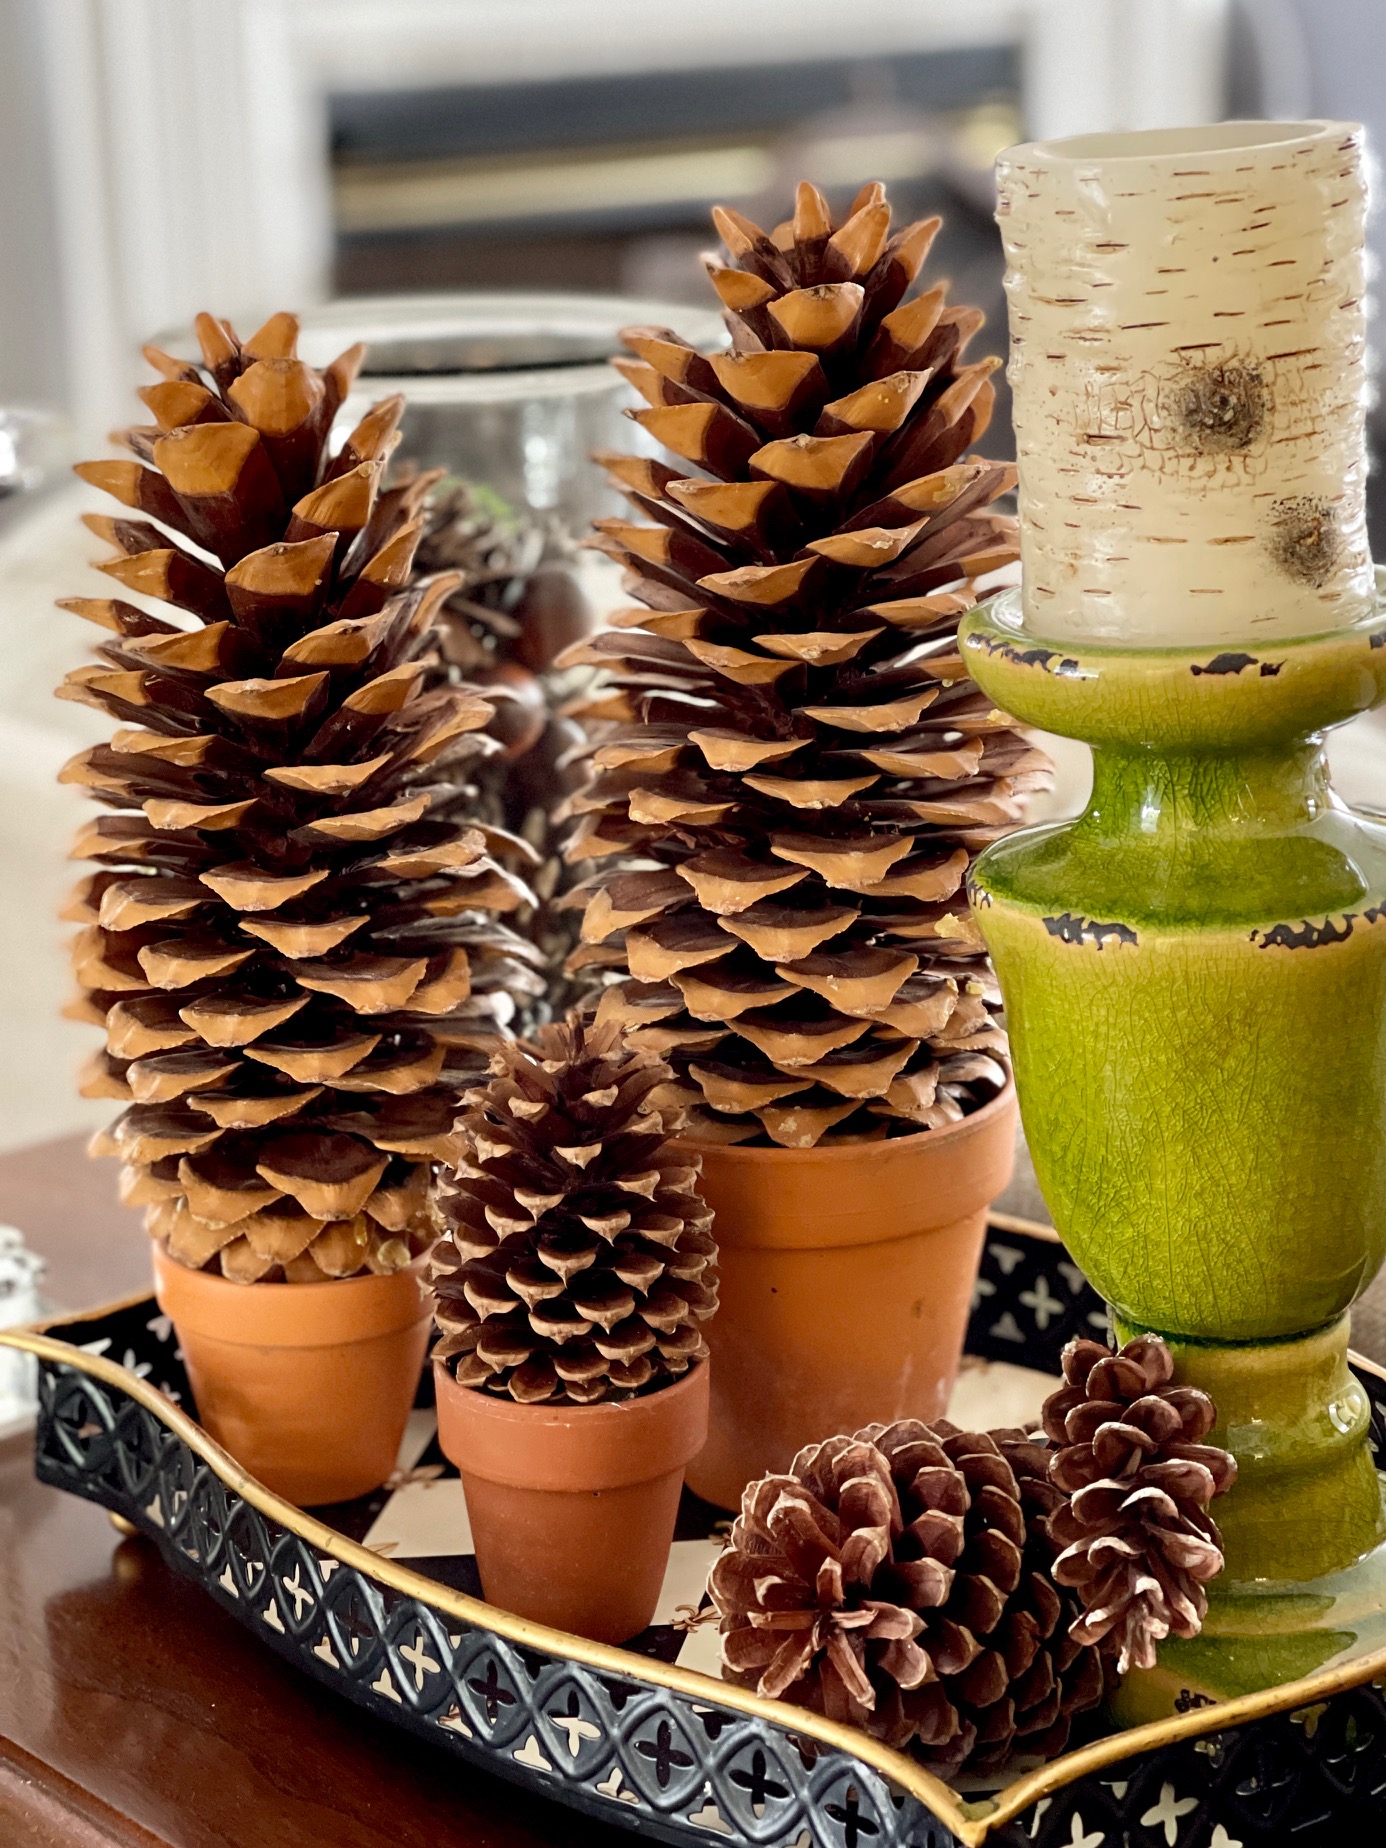 Easy Pinecone Table Decorations - Simple Nature Decor